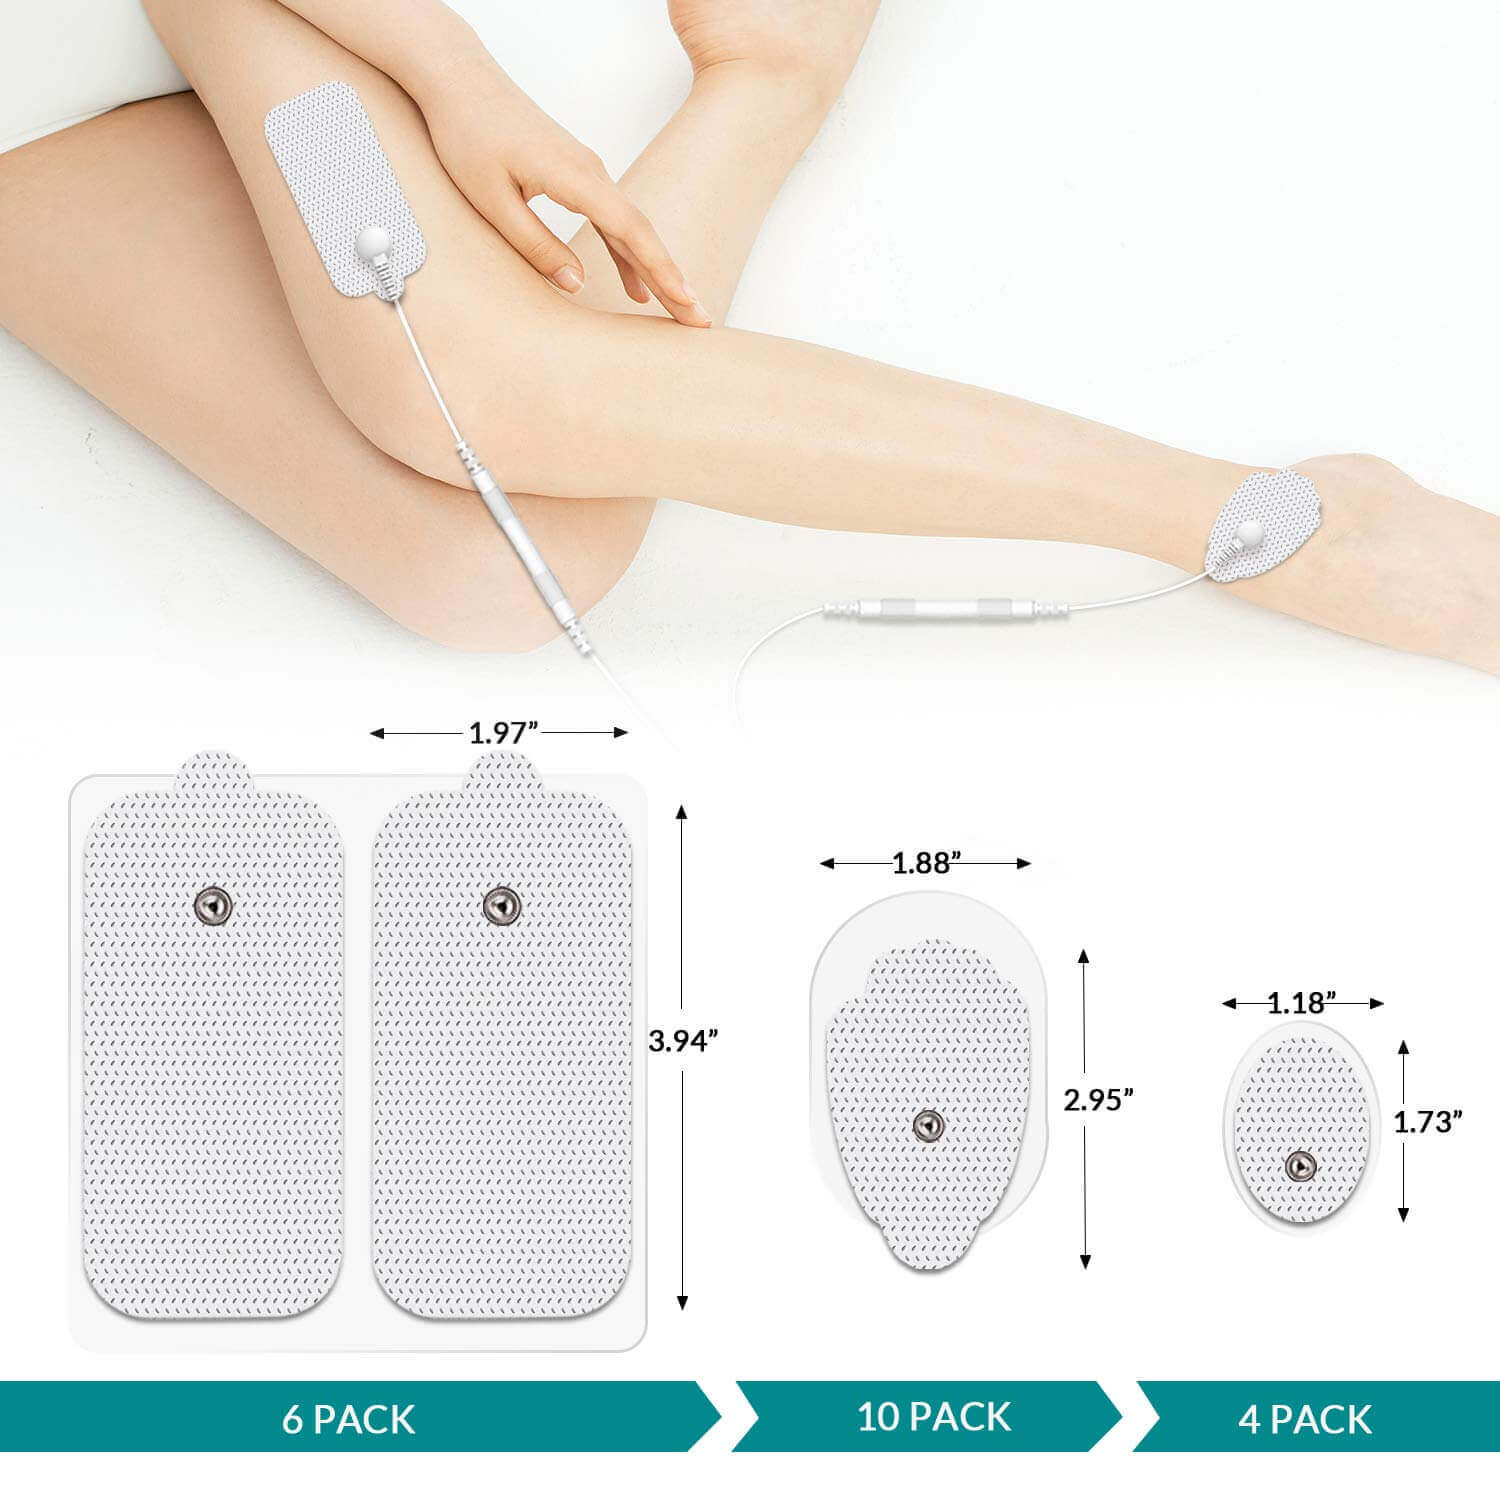 DONECO 20 Pcs Snap Electrodes Pads, Fit for Premium Small Medium and Large Pads